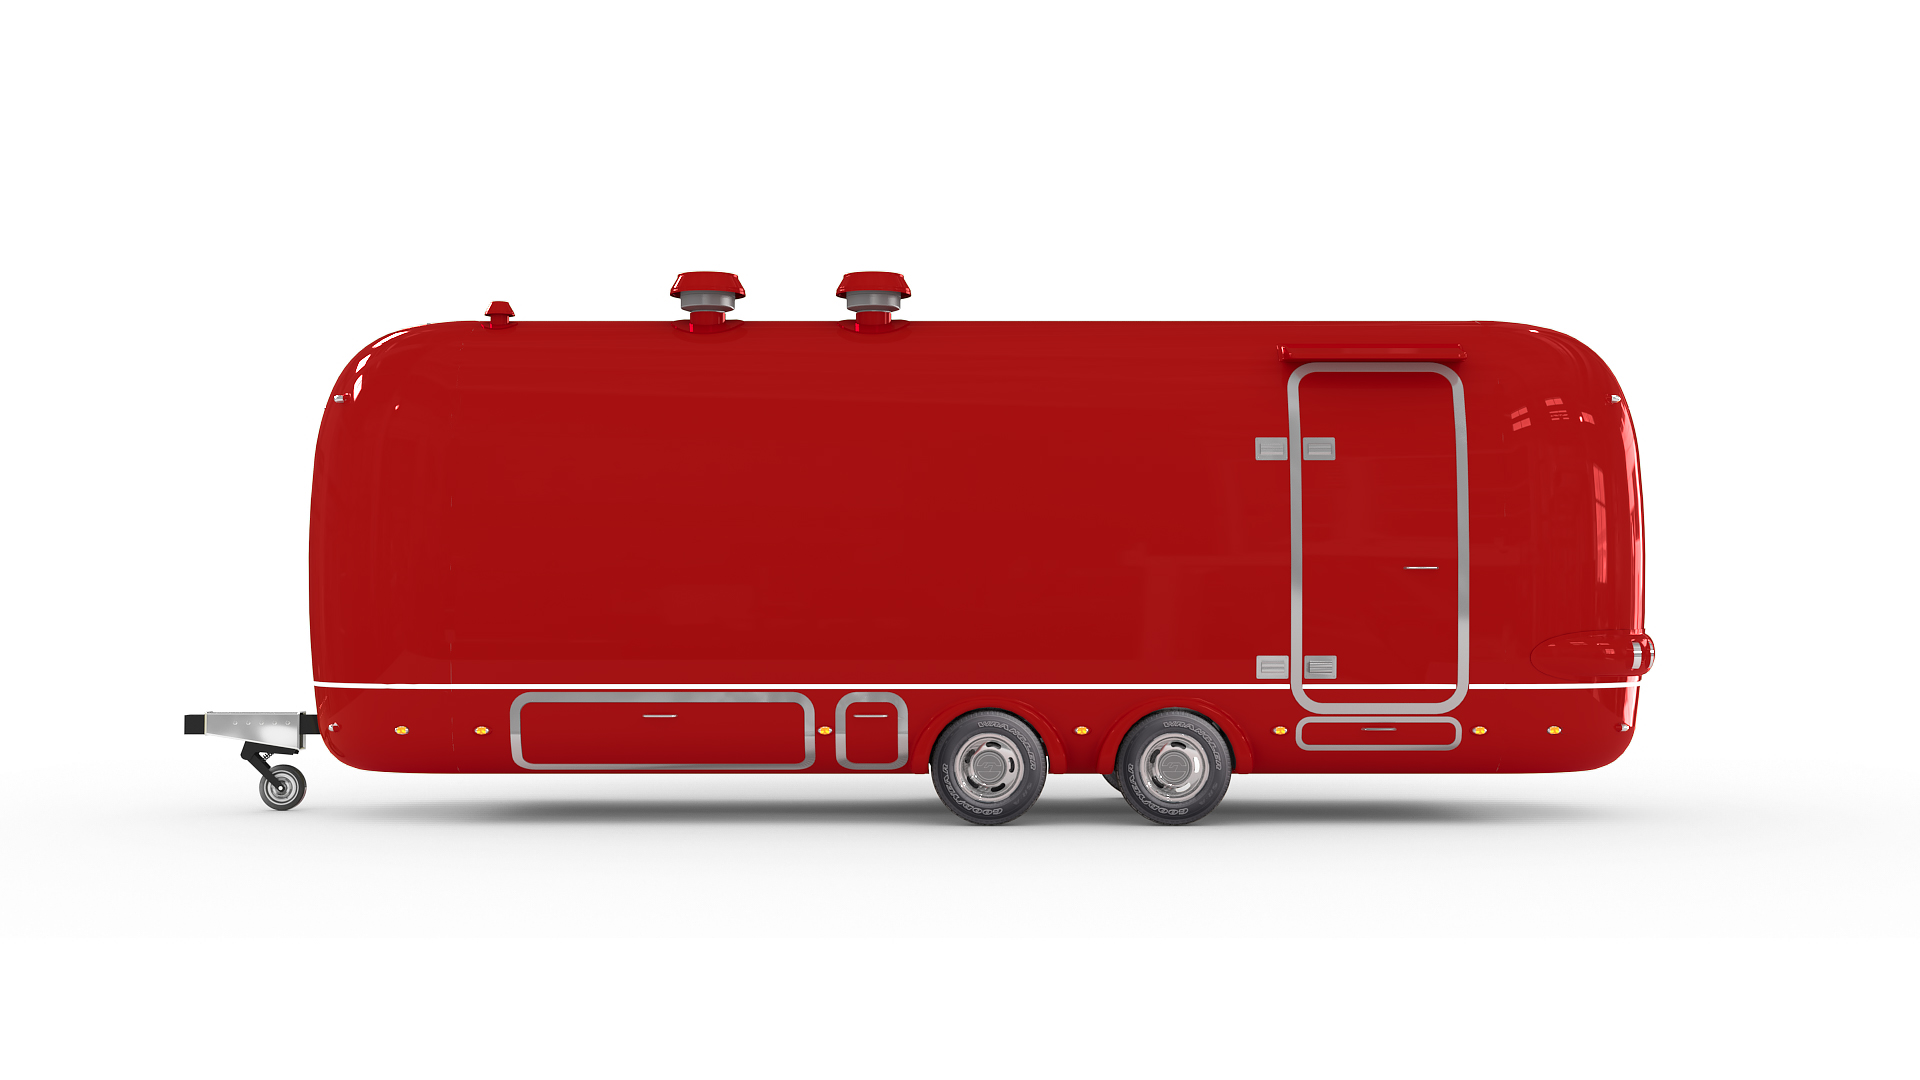 Build trailers in Europe